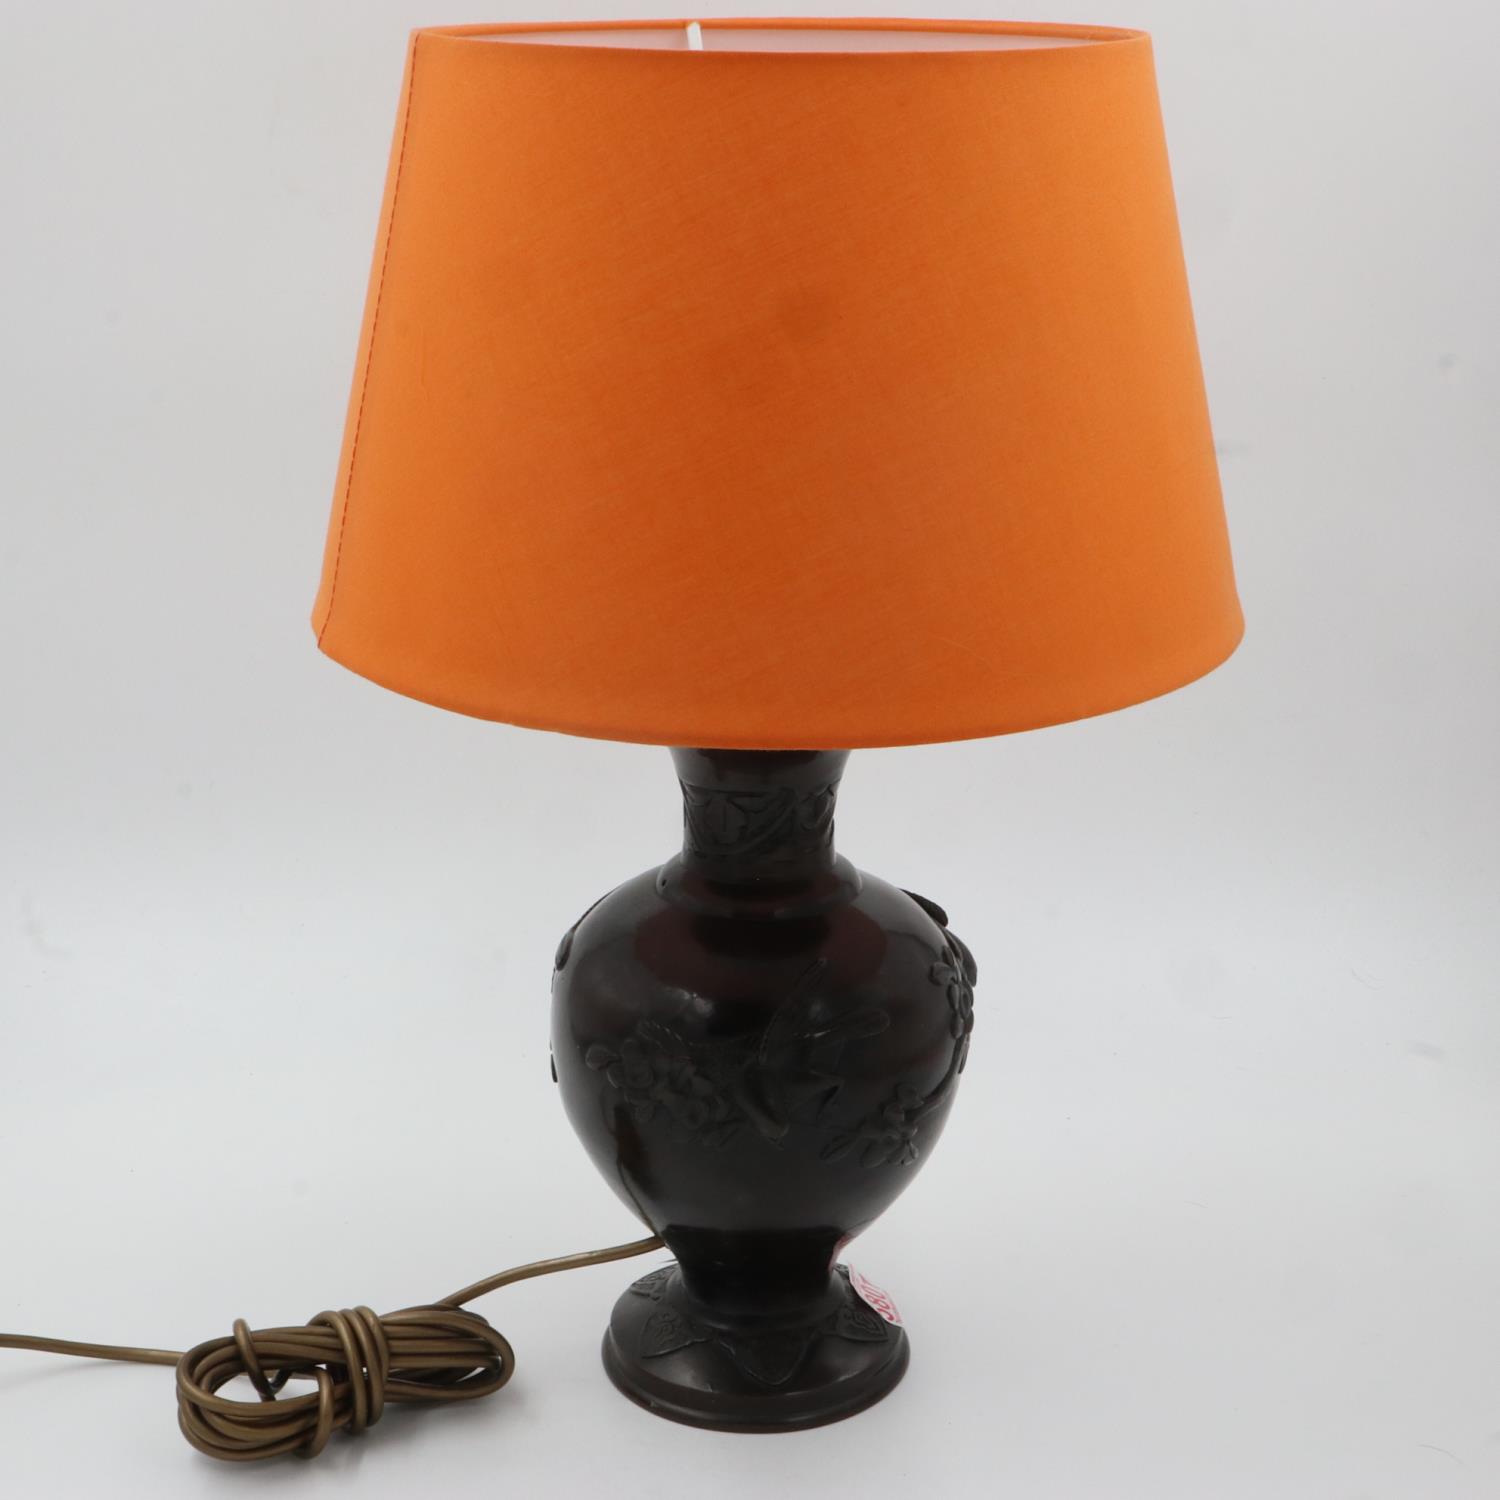 Oriental bronze table lamp with shade, decorated with birds and cherry blossom, H: 53 cm. All